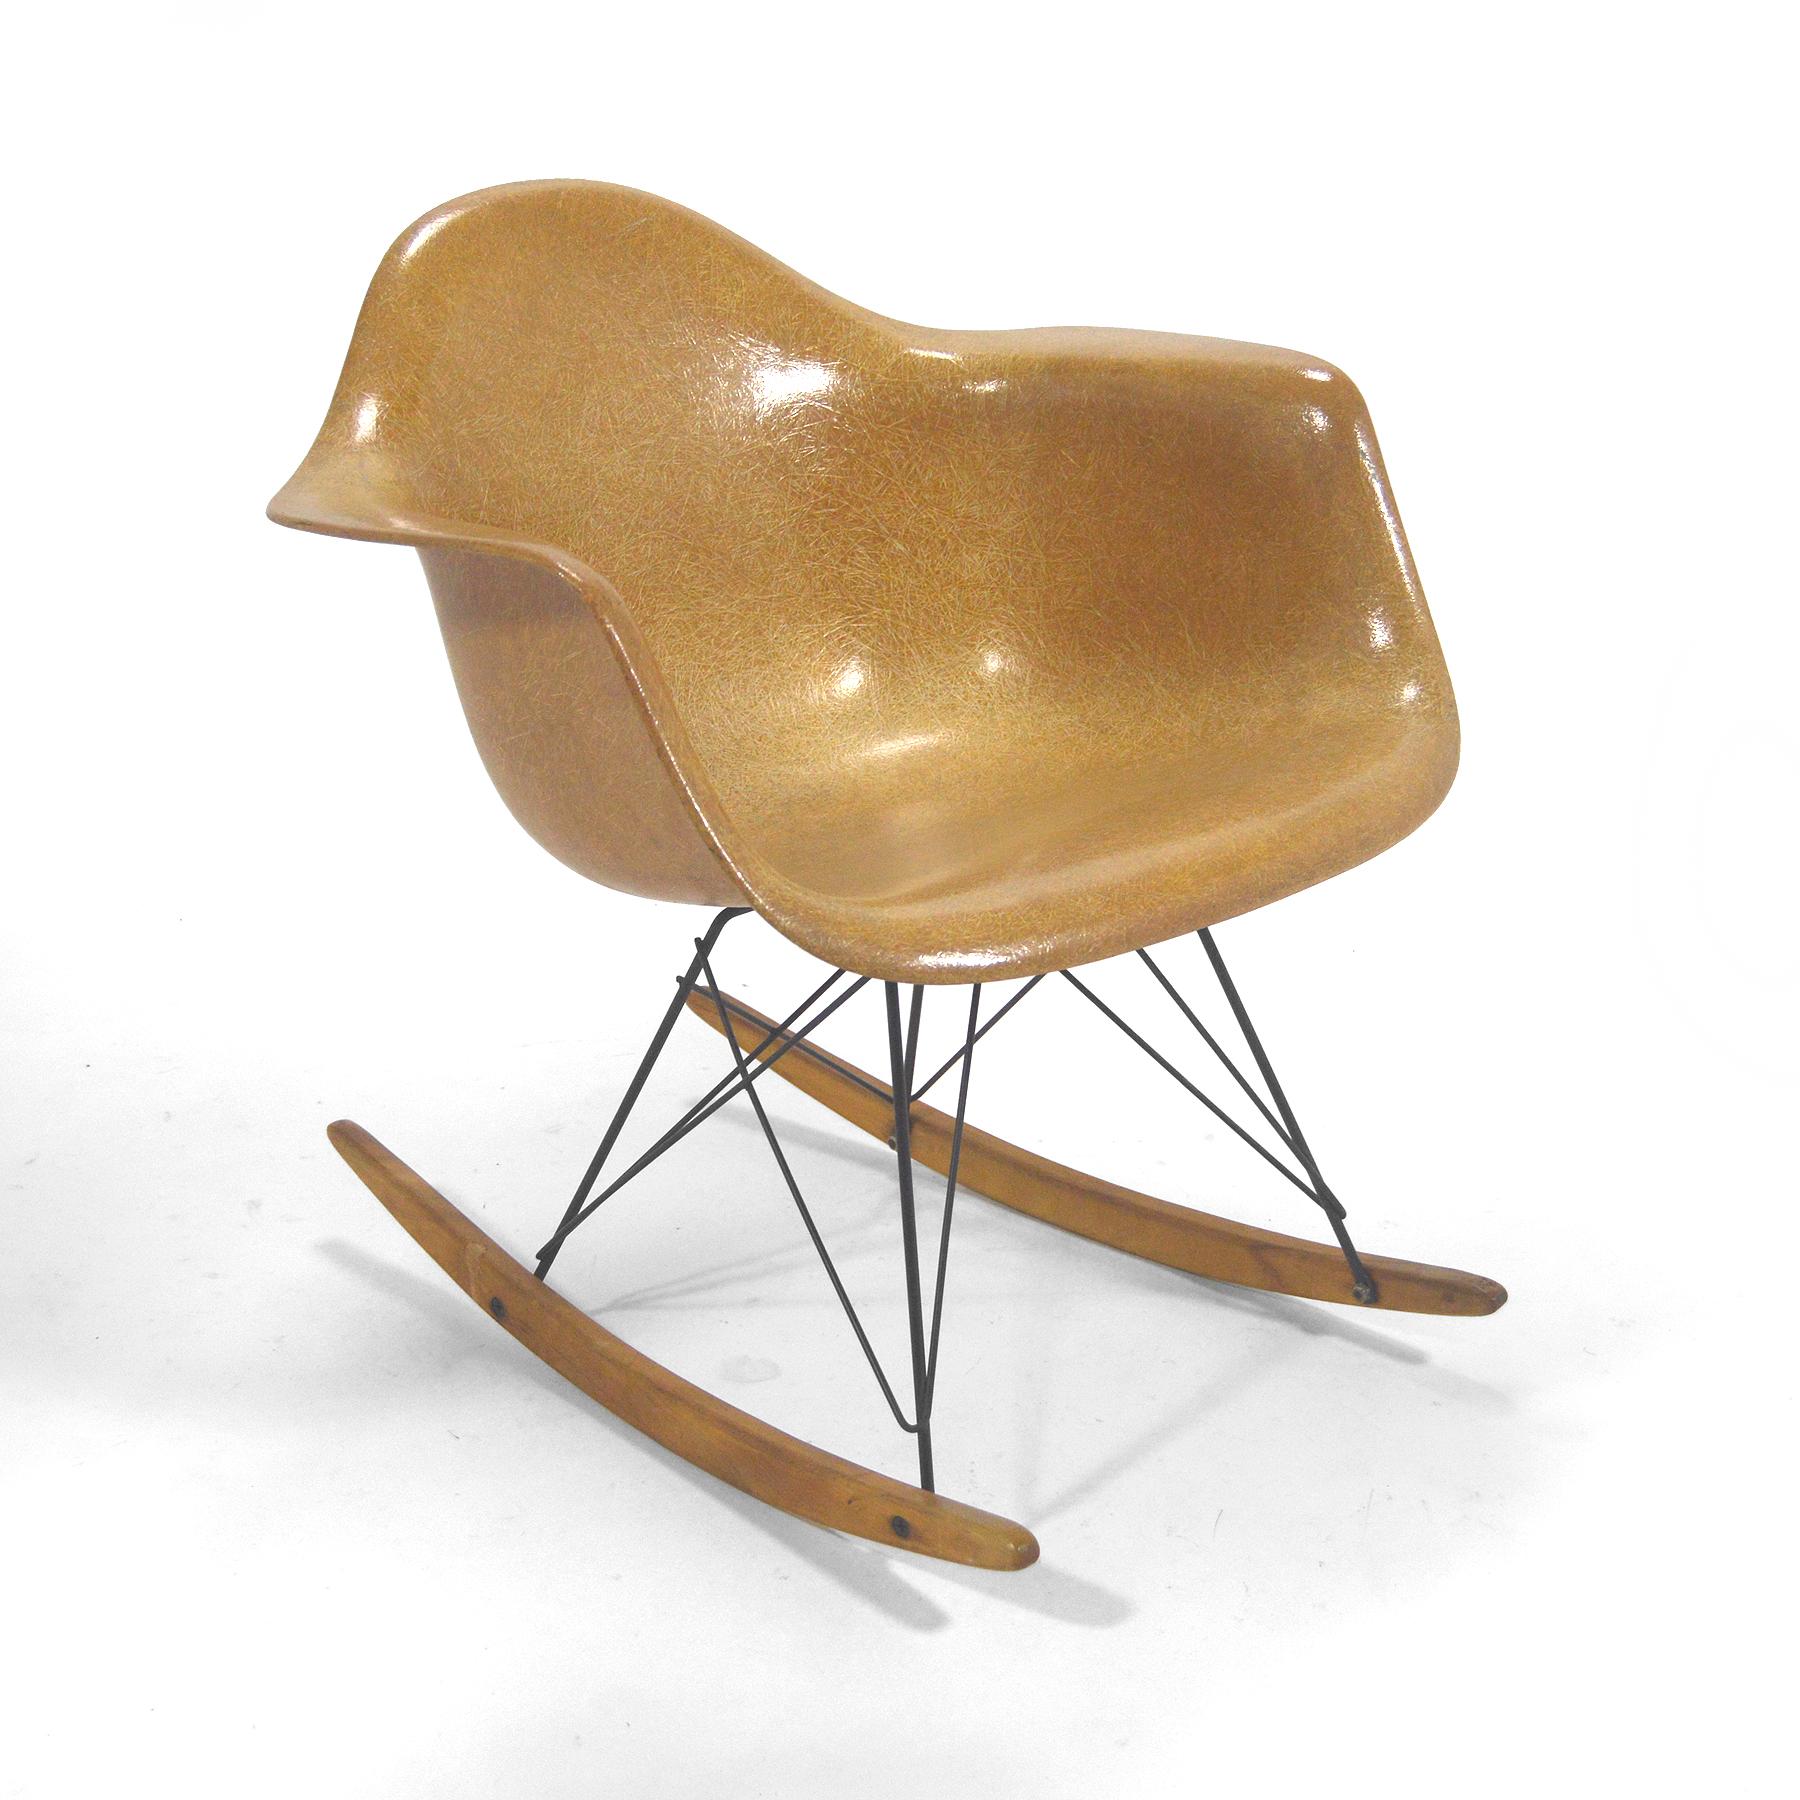 The early Zenith shells are distinctive for their high fiber content and larger, more substantial rubber shock mounts, a translucent quality to the fiberglass. RAR was the designation given chairs with the rocking base. This fine rocker is all